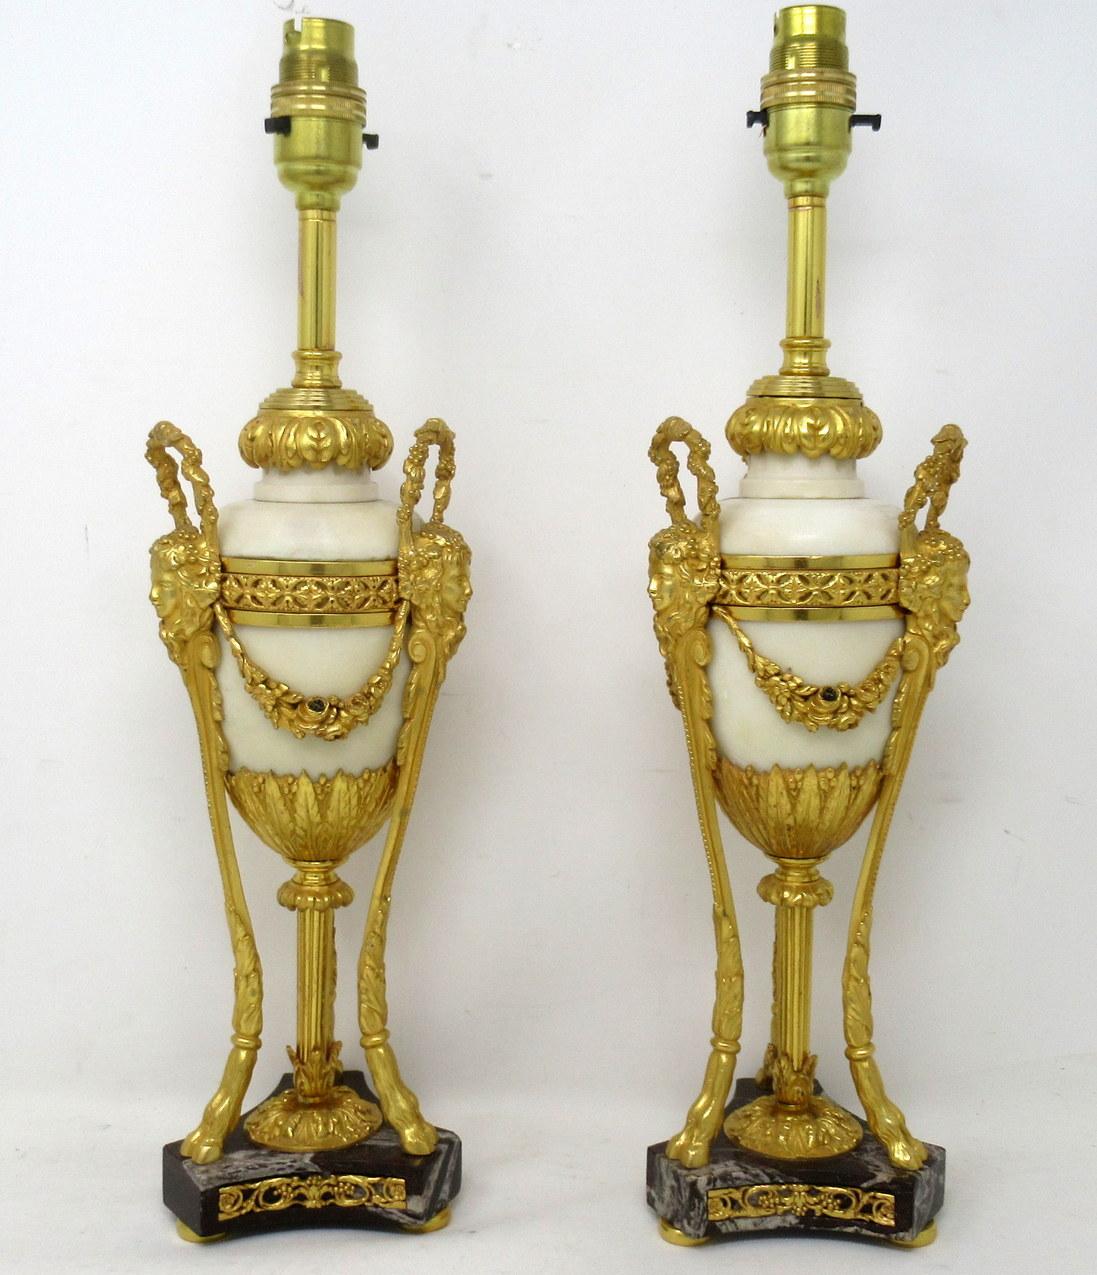 An exceptionally fine quality pair of French heavy Gauge Chisel Cast Ormolu-Mounted Statutory cream marble Garniture Urns, of elegant tall proportions, of French origin, now professionally converted to a pair Electrical table lamps. First quarter of